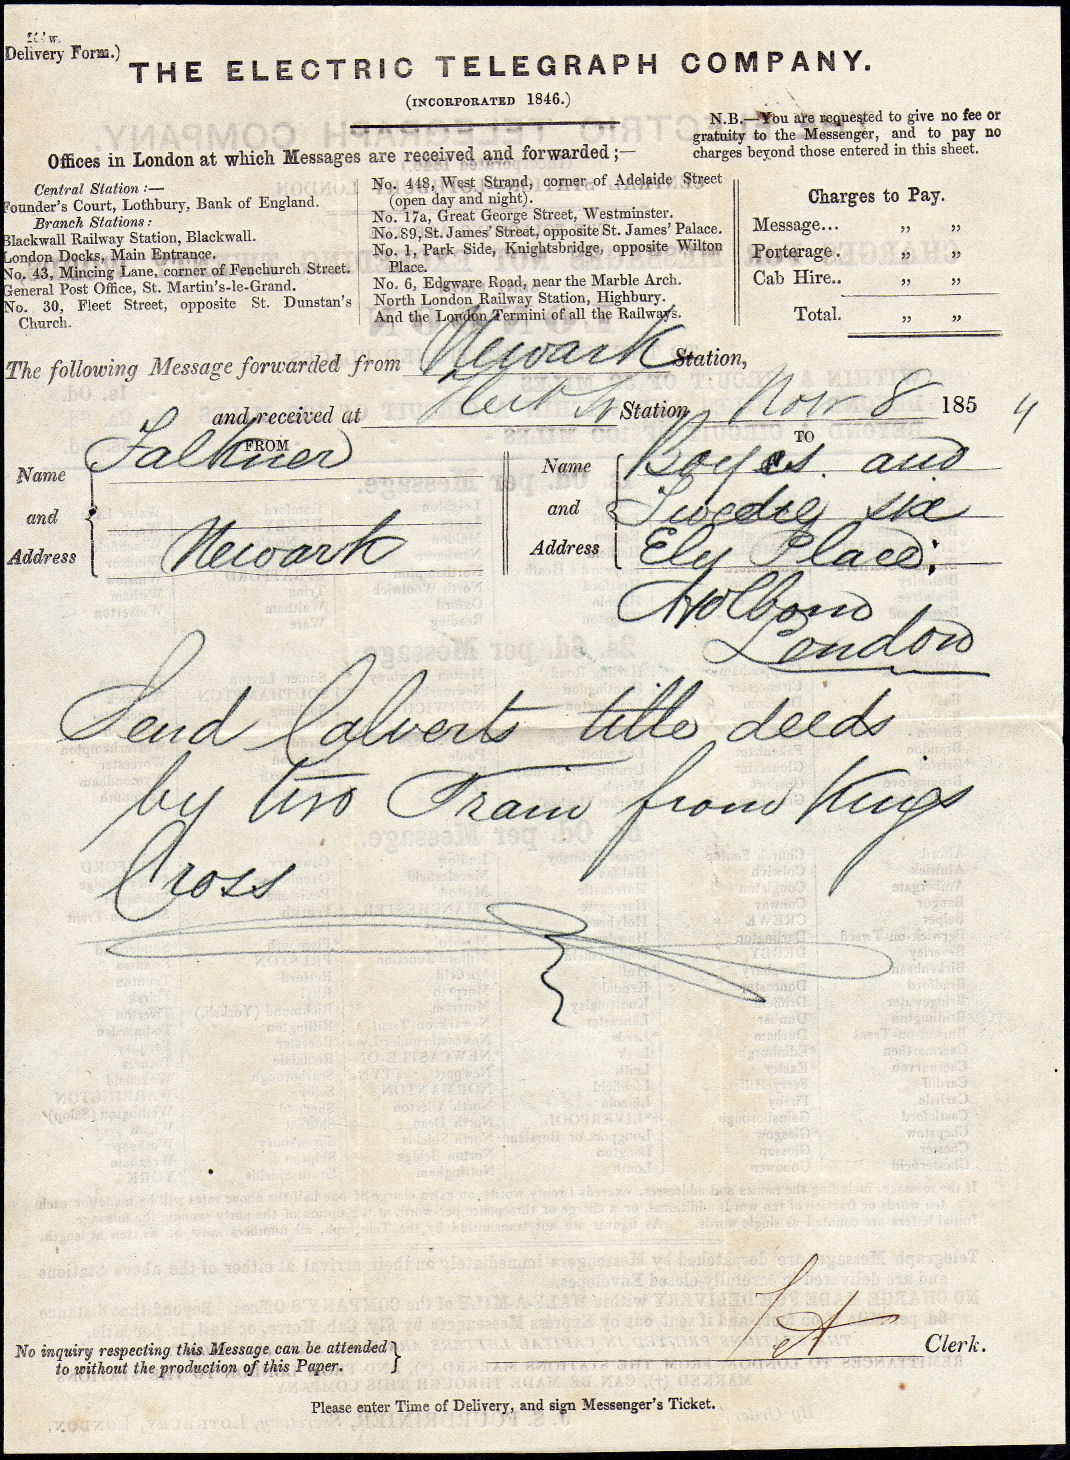 Electric Telegraph Company Stationery.